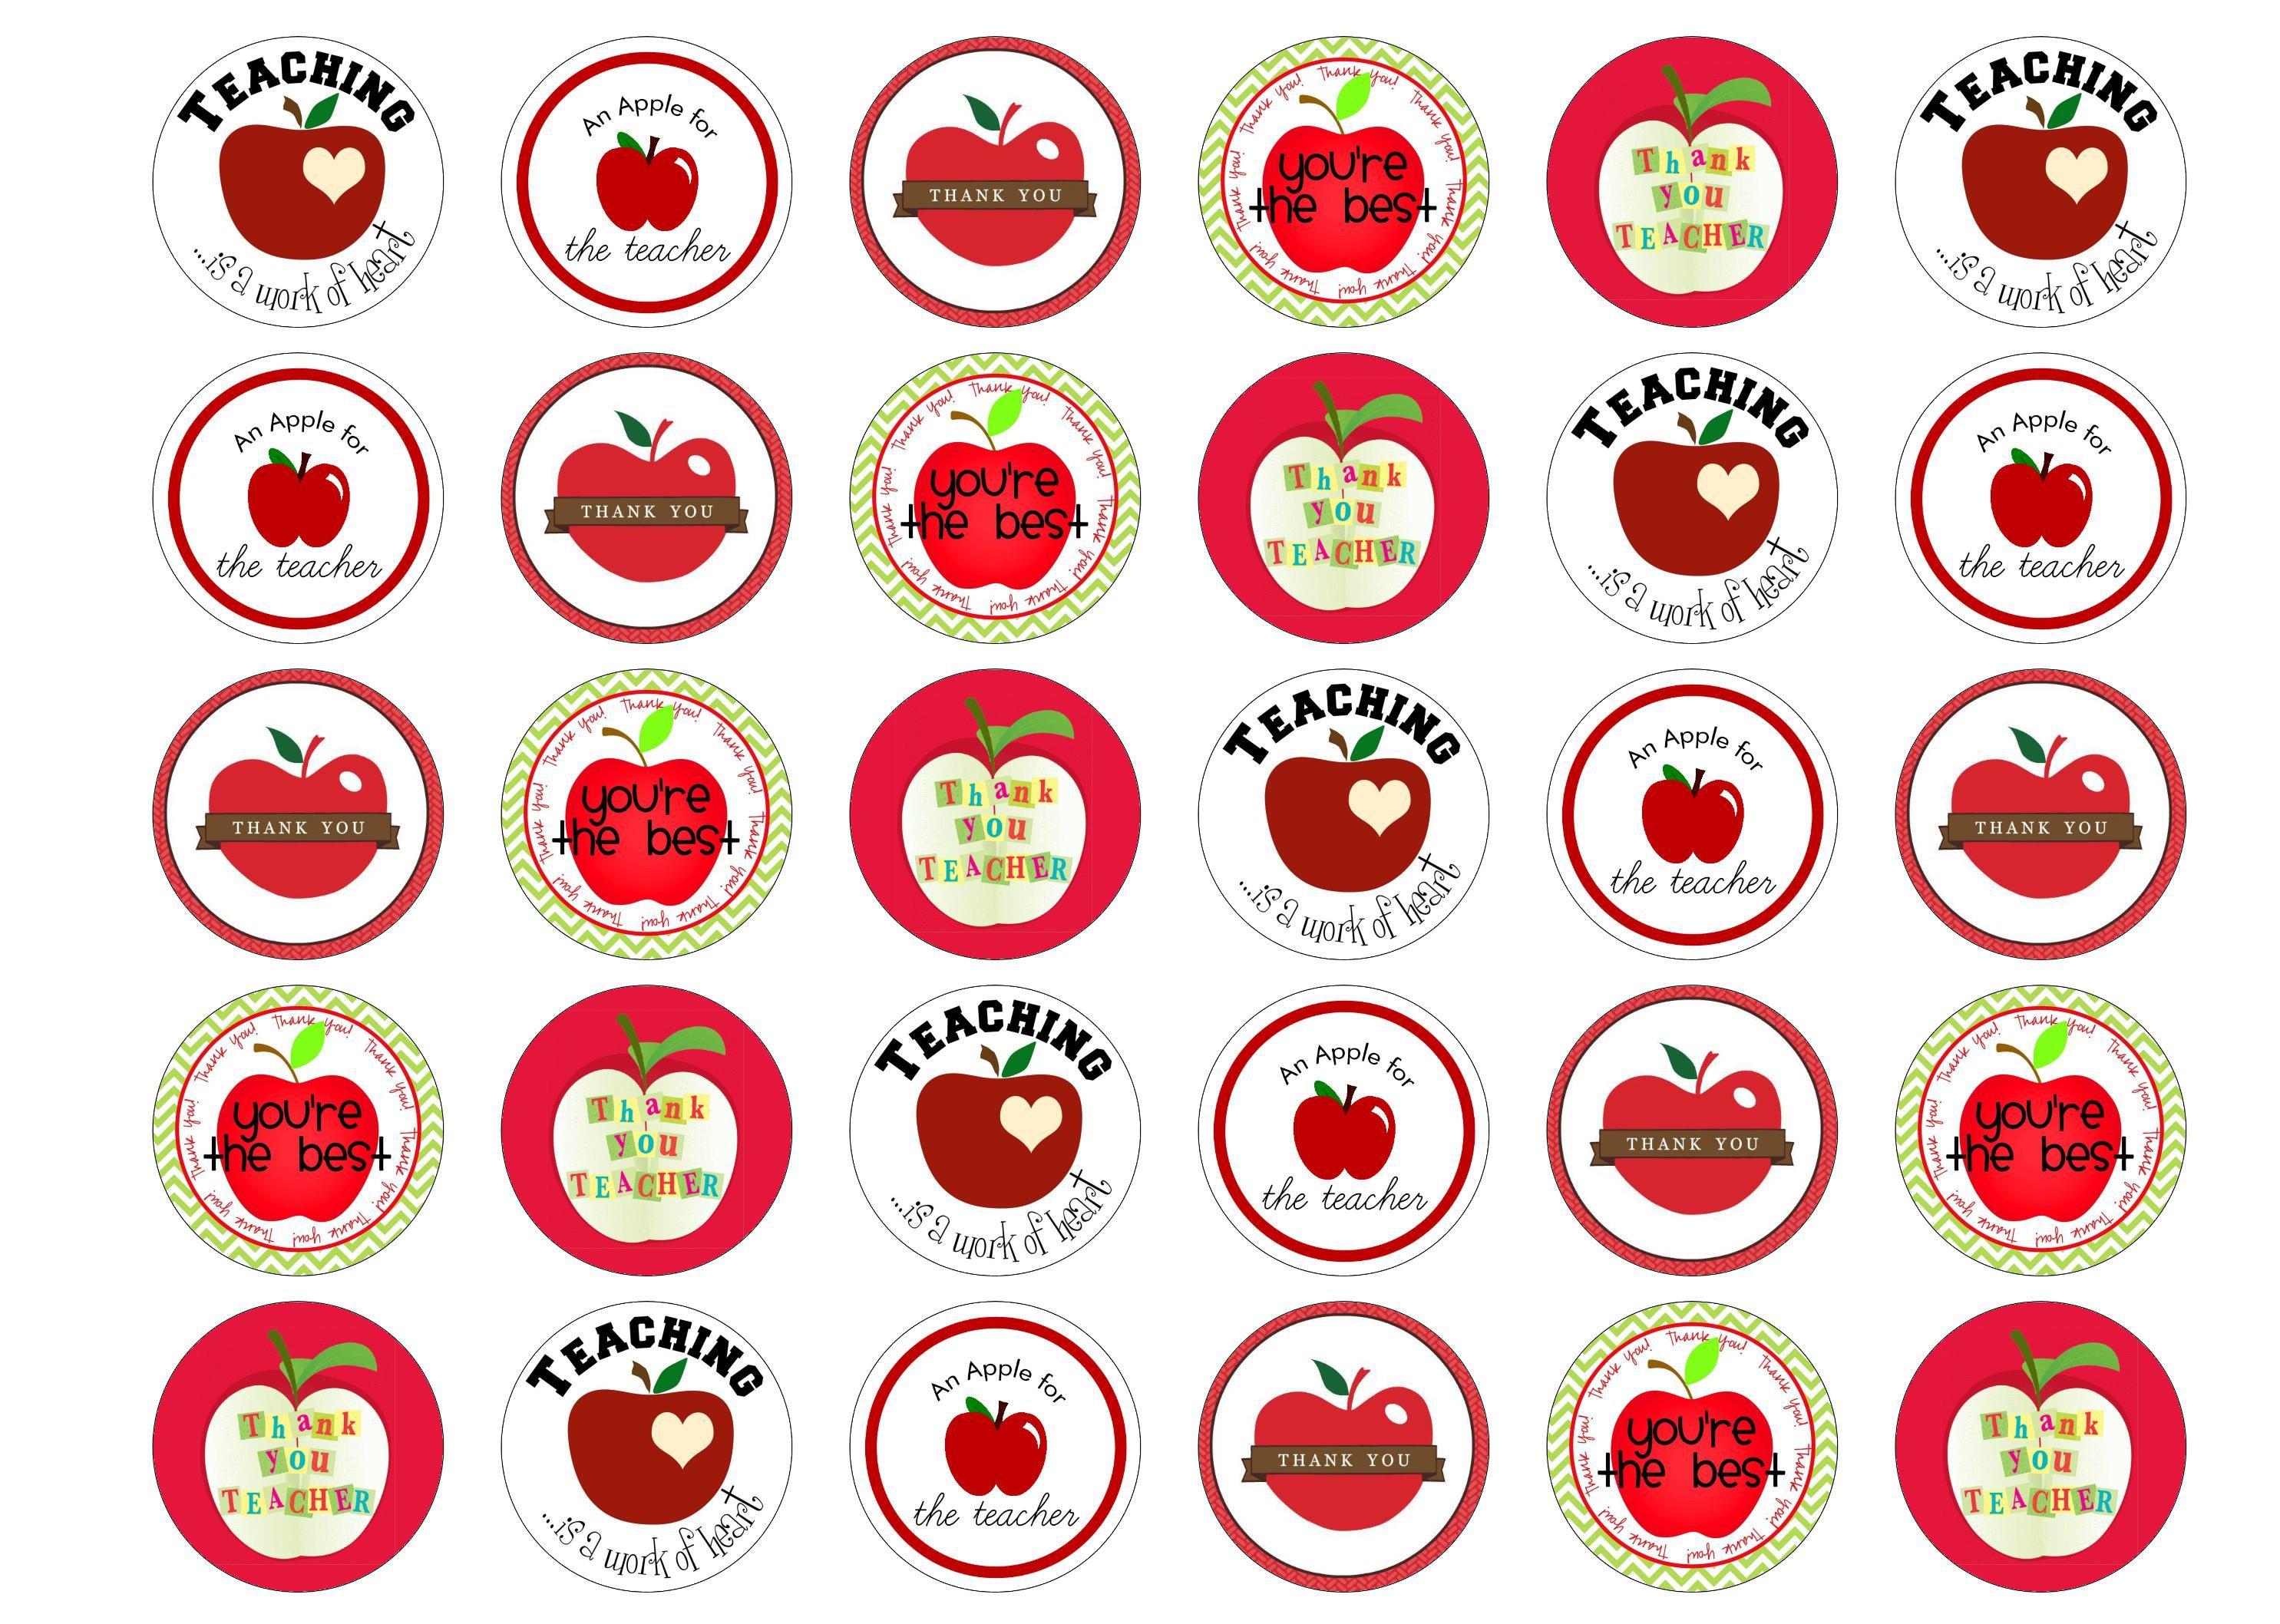 30 edible cupcake toppers with images of apples for teachers